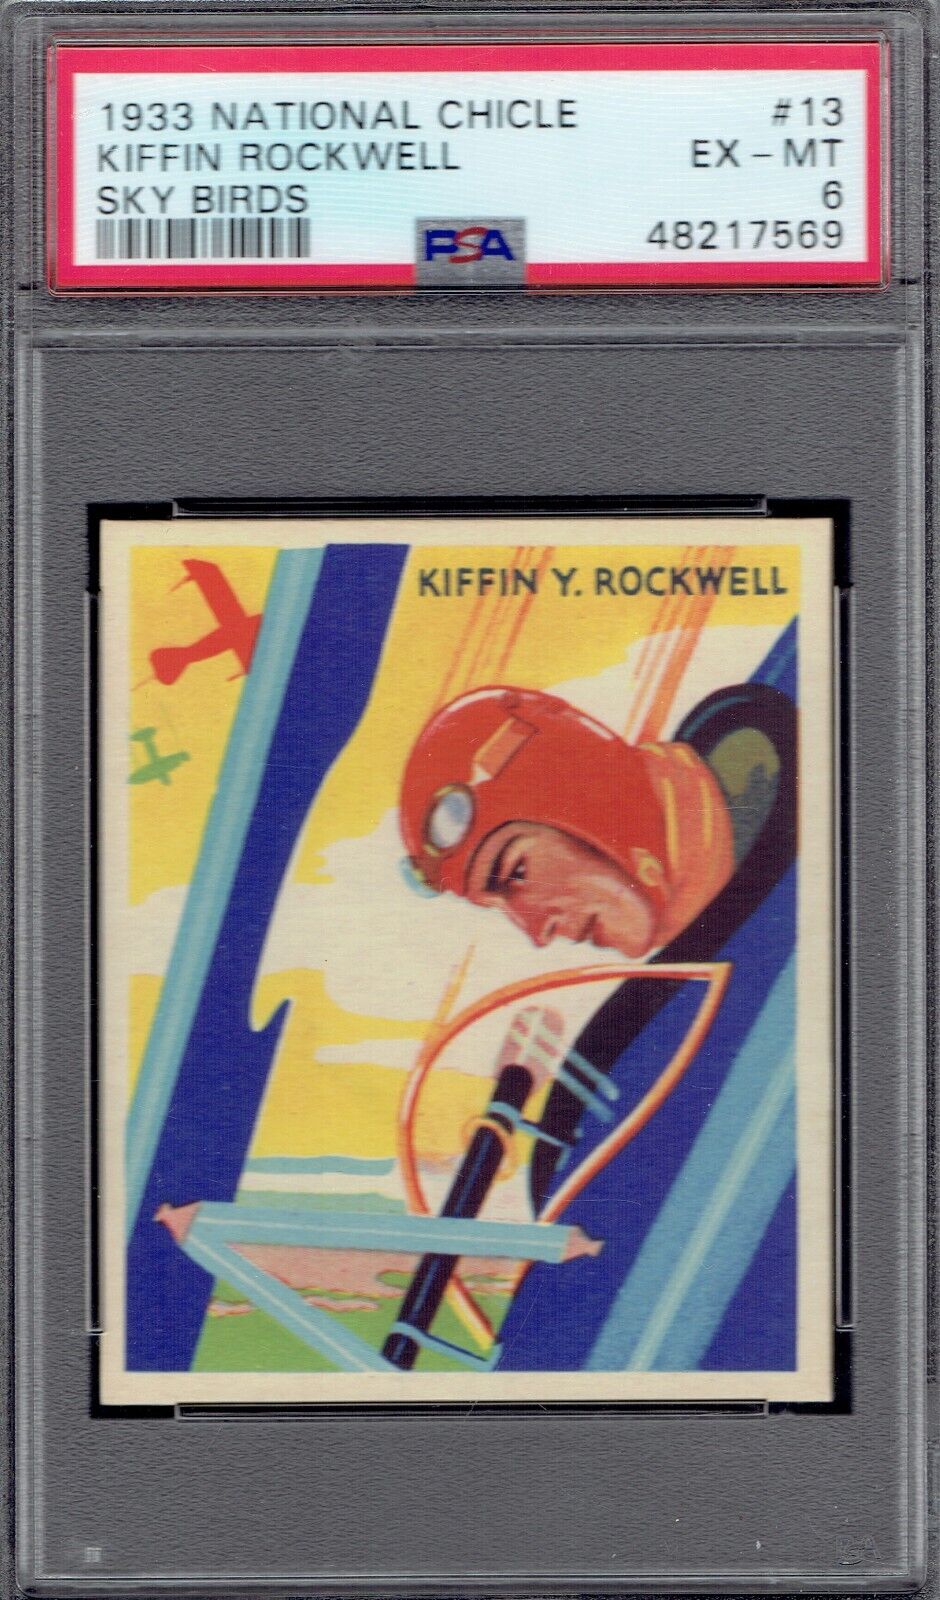 1933 National Chicle Sky Birds 13 Kiffin Rockwell.  PSA 6 EXMT.  (TX7569).